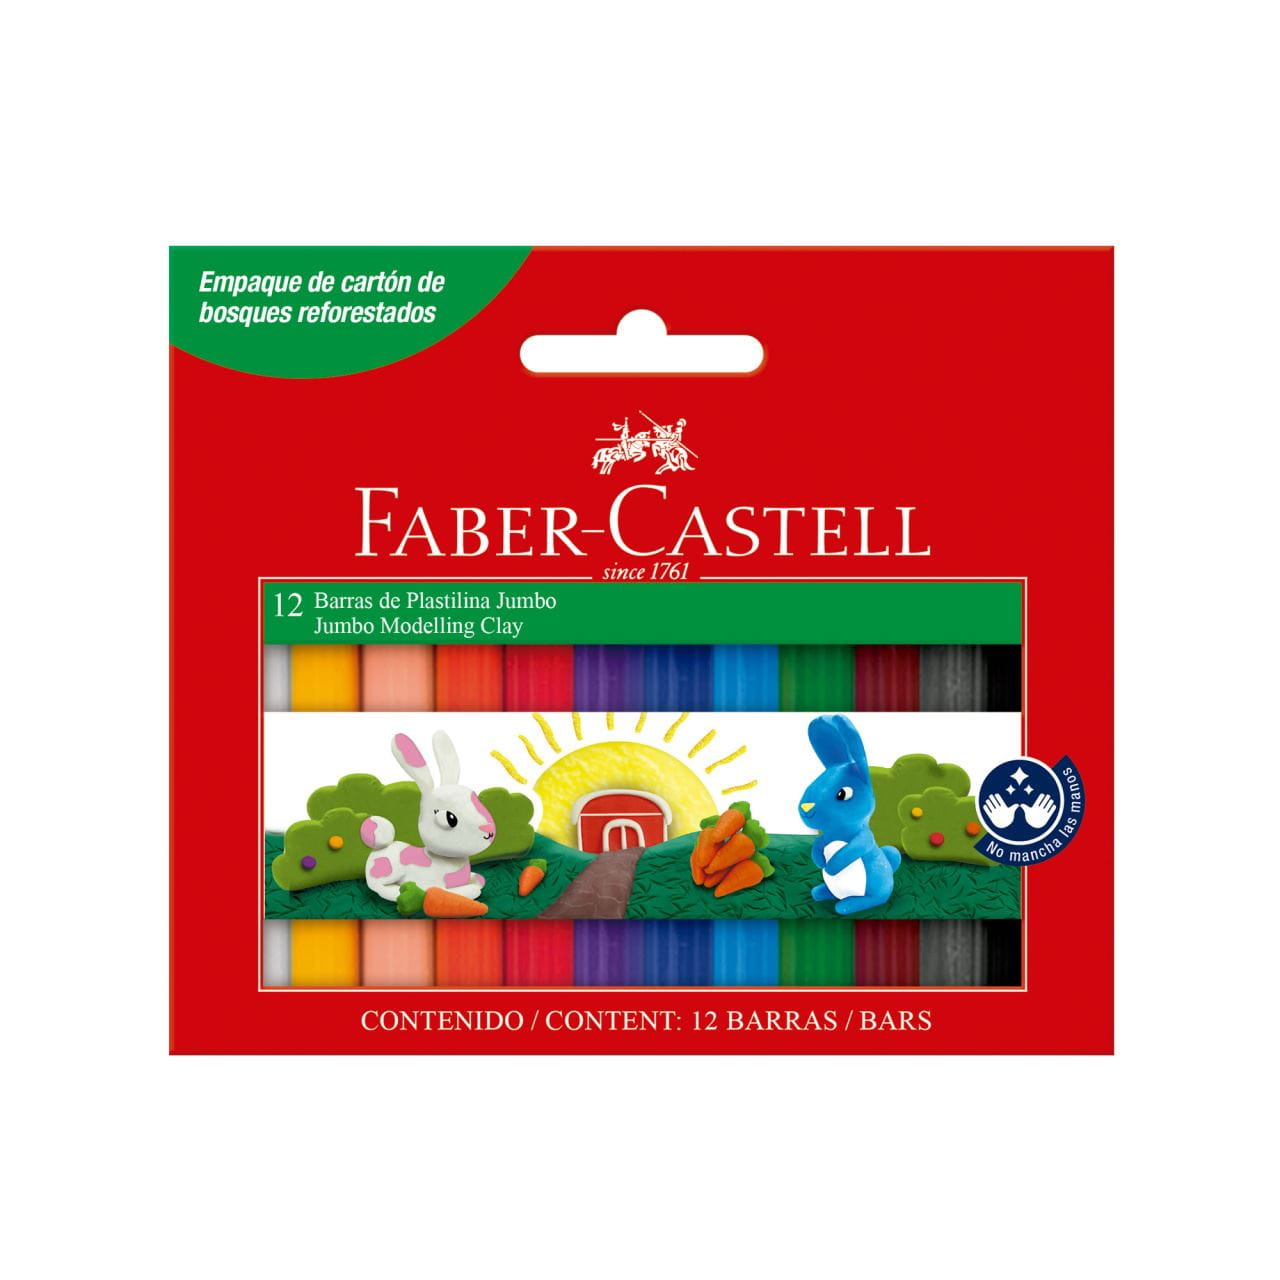 Faber-Castell - Modelling clay Jumbo set of 12